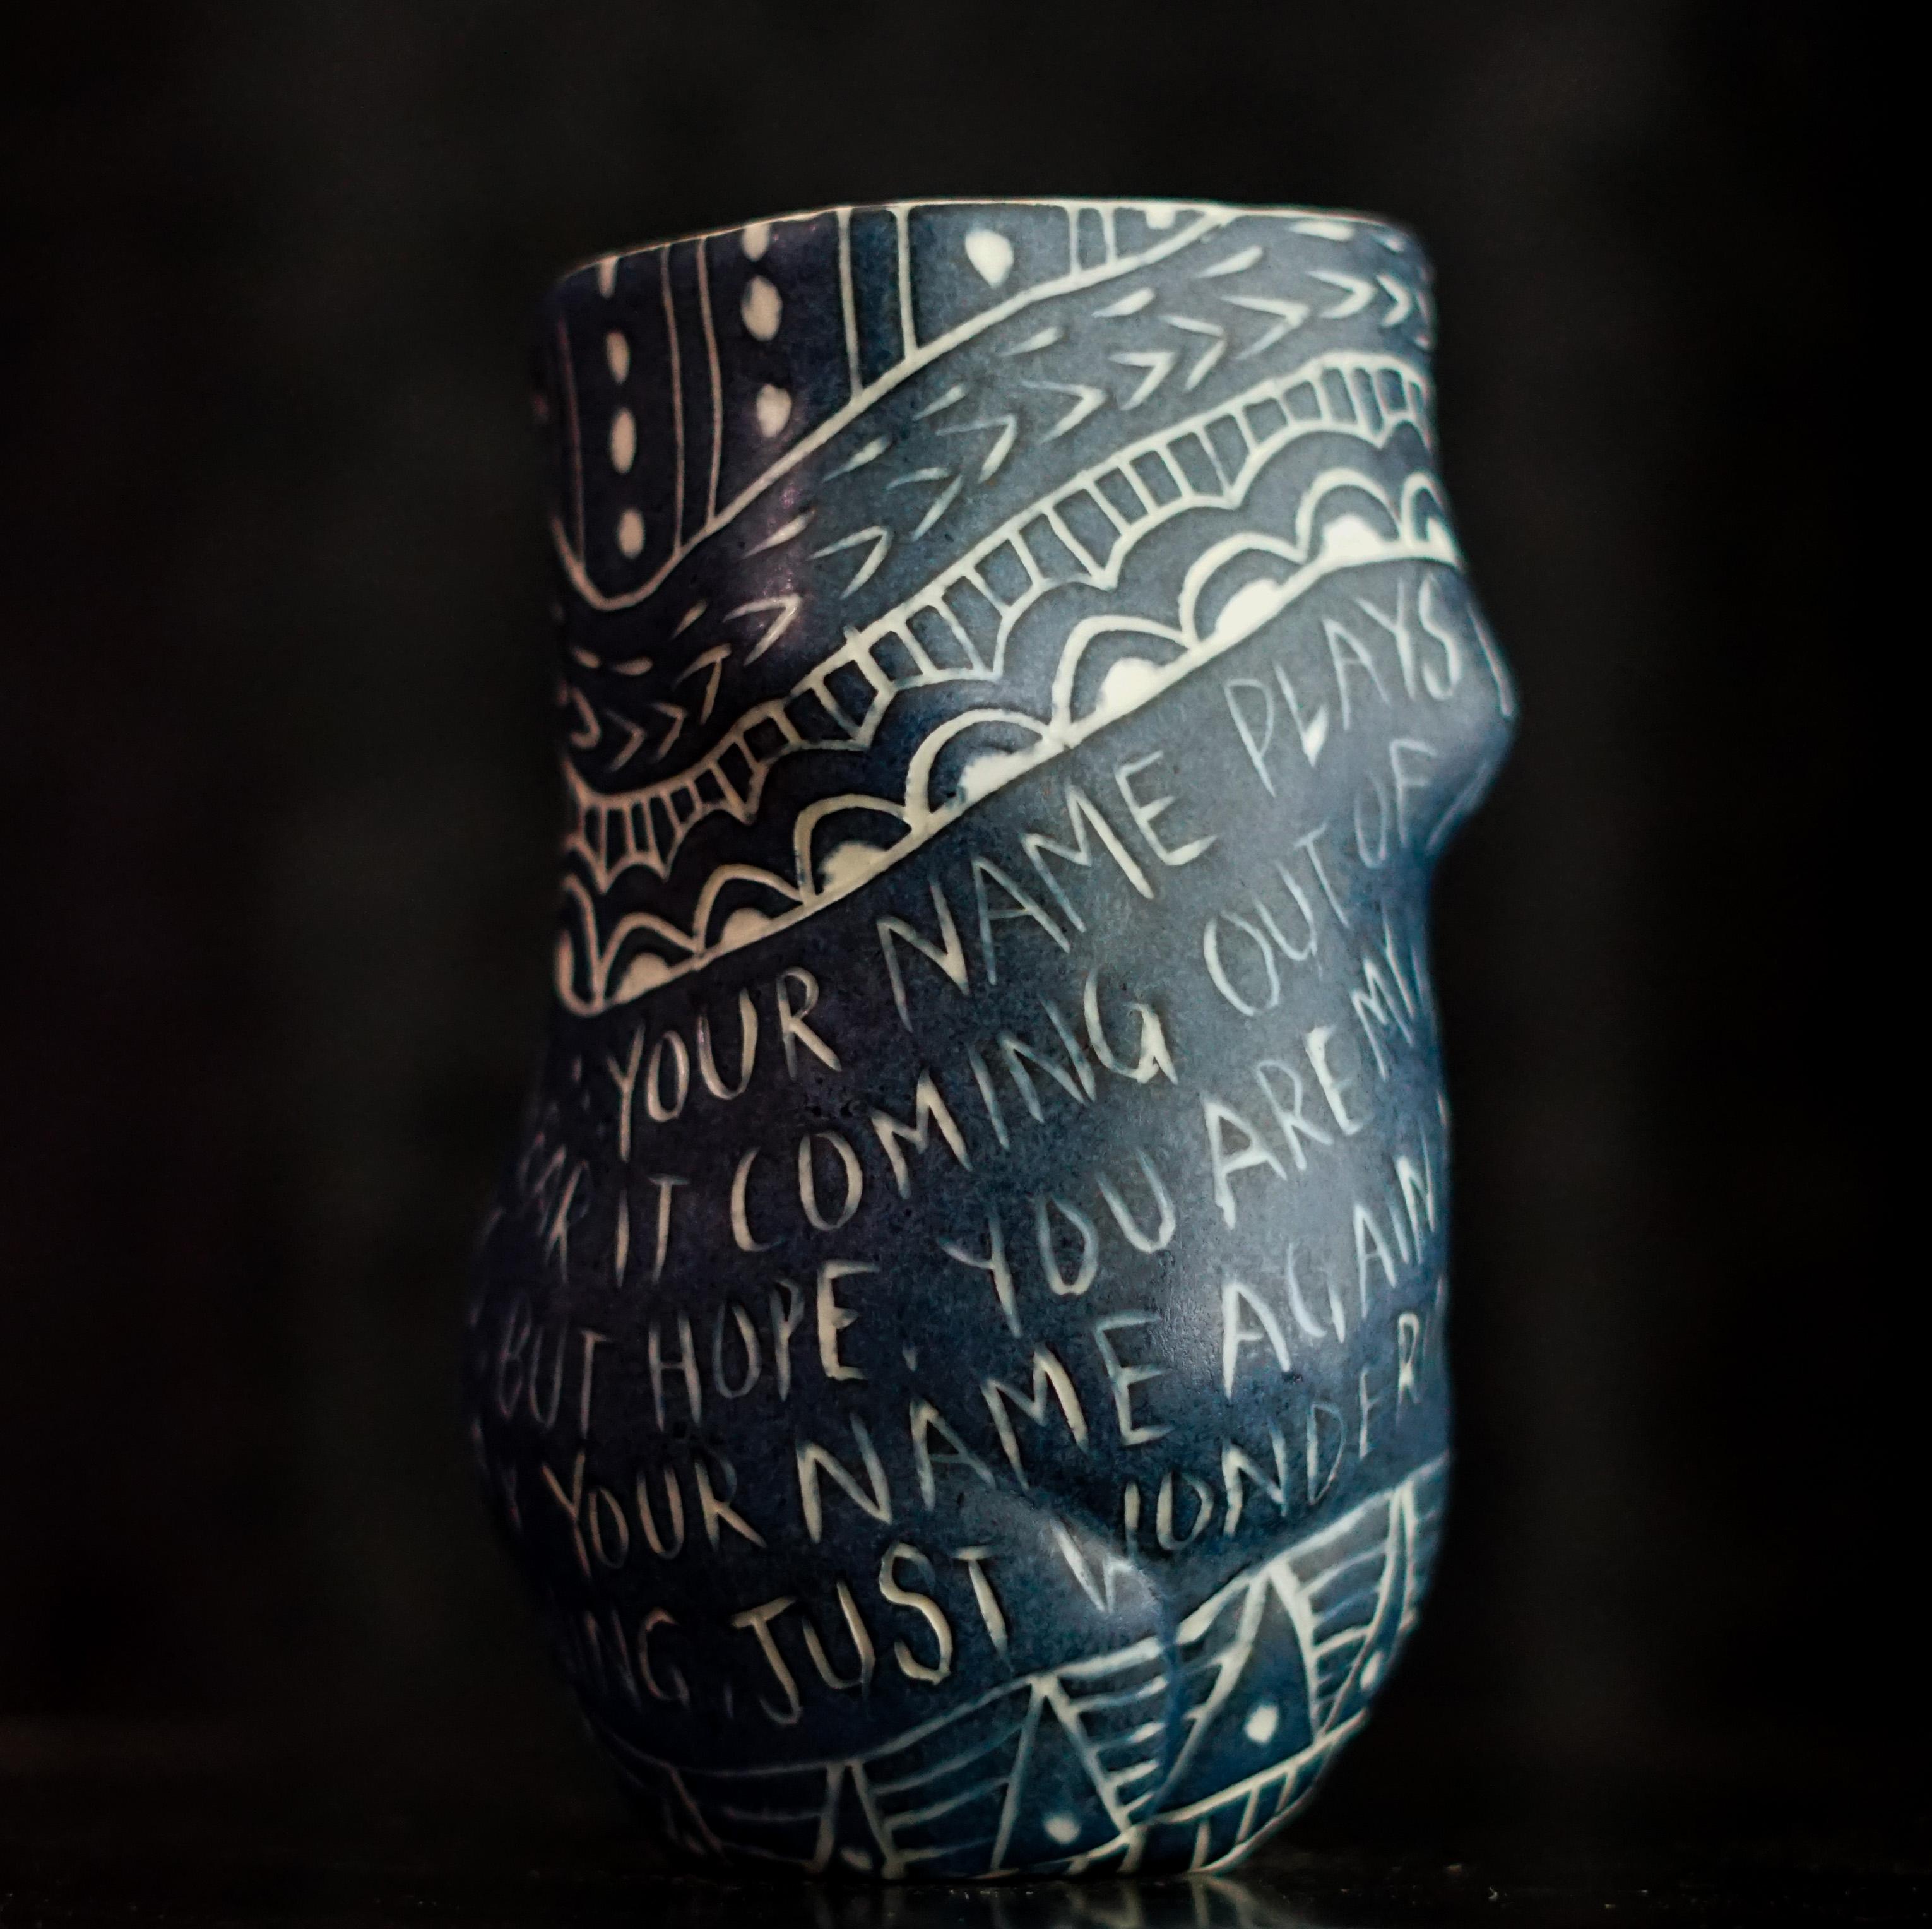 “Your Name Plays...”, 2019
From the series Fragments of Our Love Story
Porcelain cup with sgraffito detailing
5.5 x 3 x 3 inches.

“Your name plays…” Your name plays like a prayer in my mind. I hear it coming out of my heart, not with longing, but